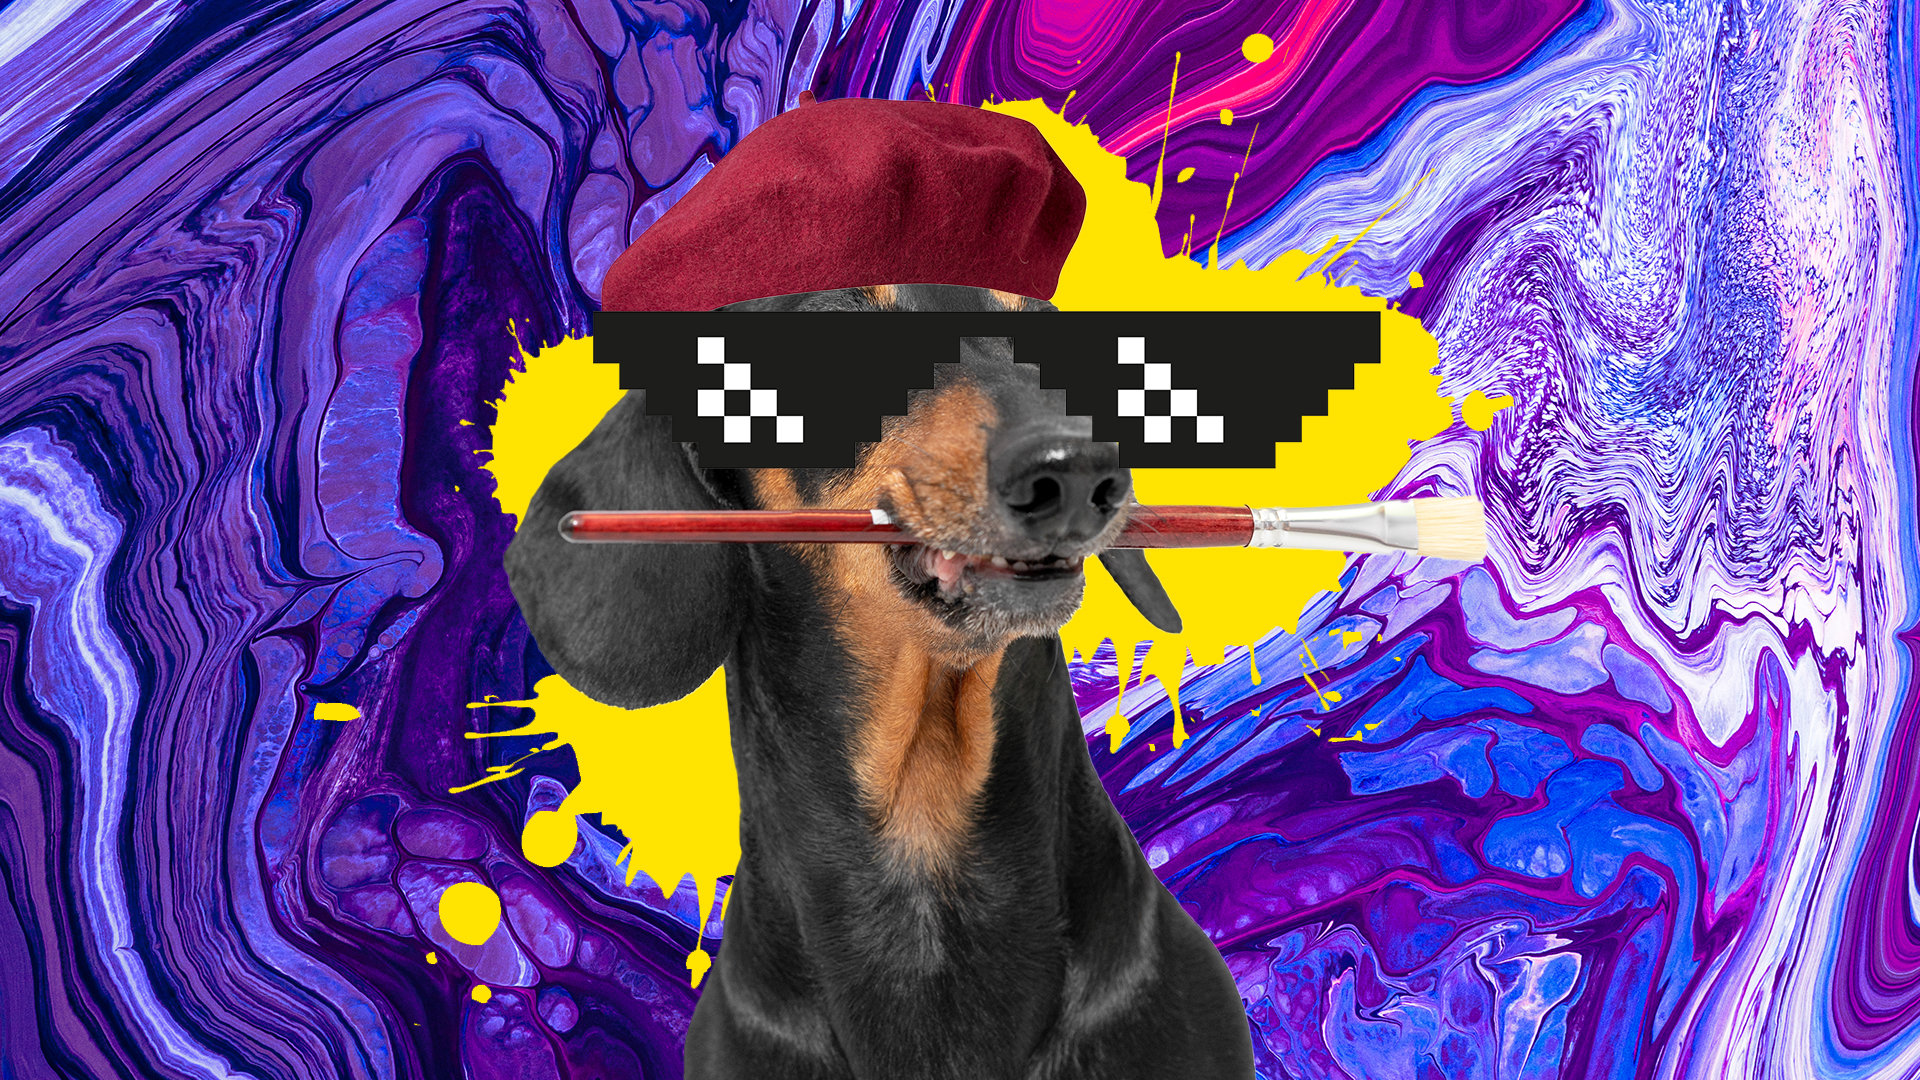 A dog wearing a beret and holding a paintbrush in its mouth